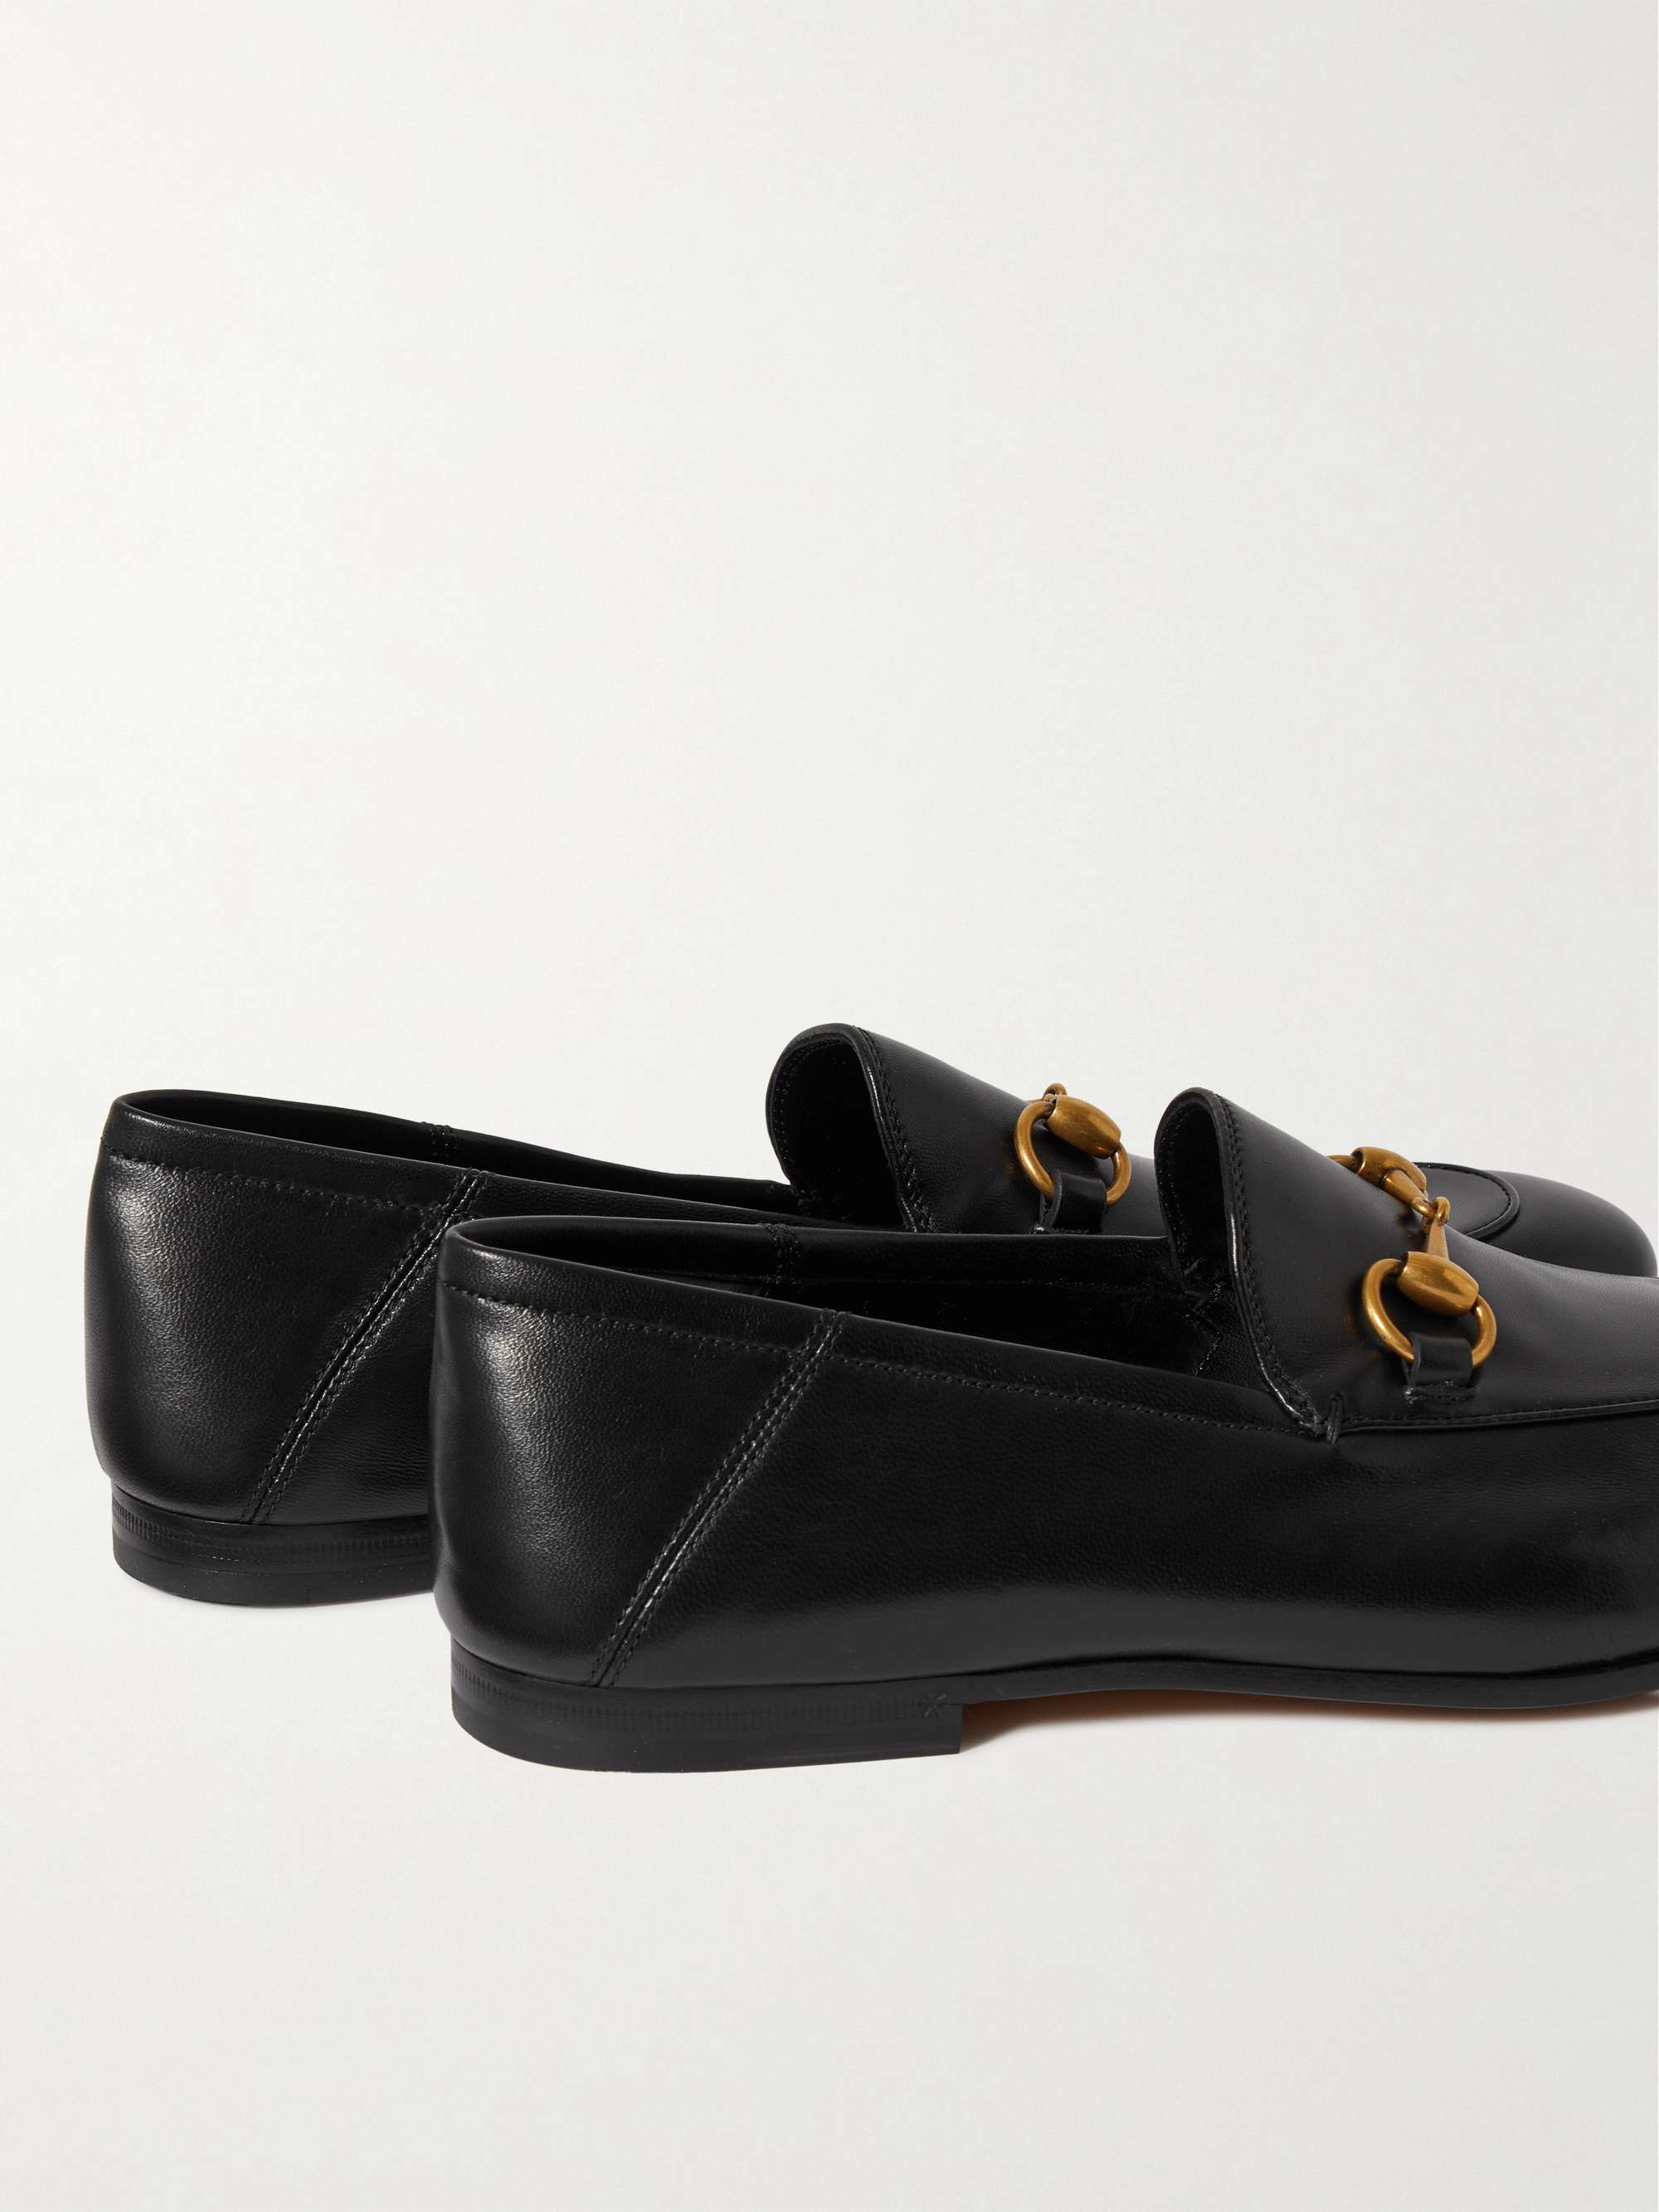 GUCCI Brixton Horsebit Collapsible-Heel Leather Loafers